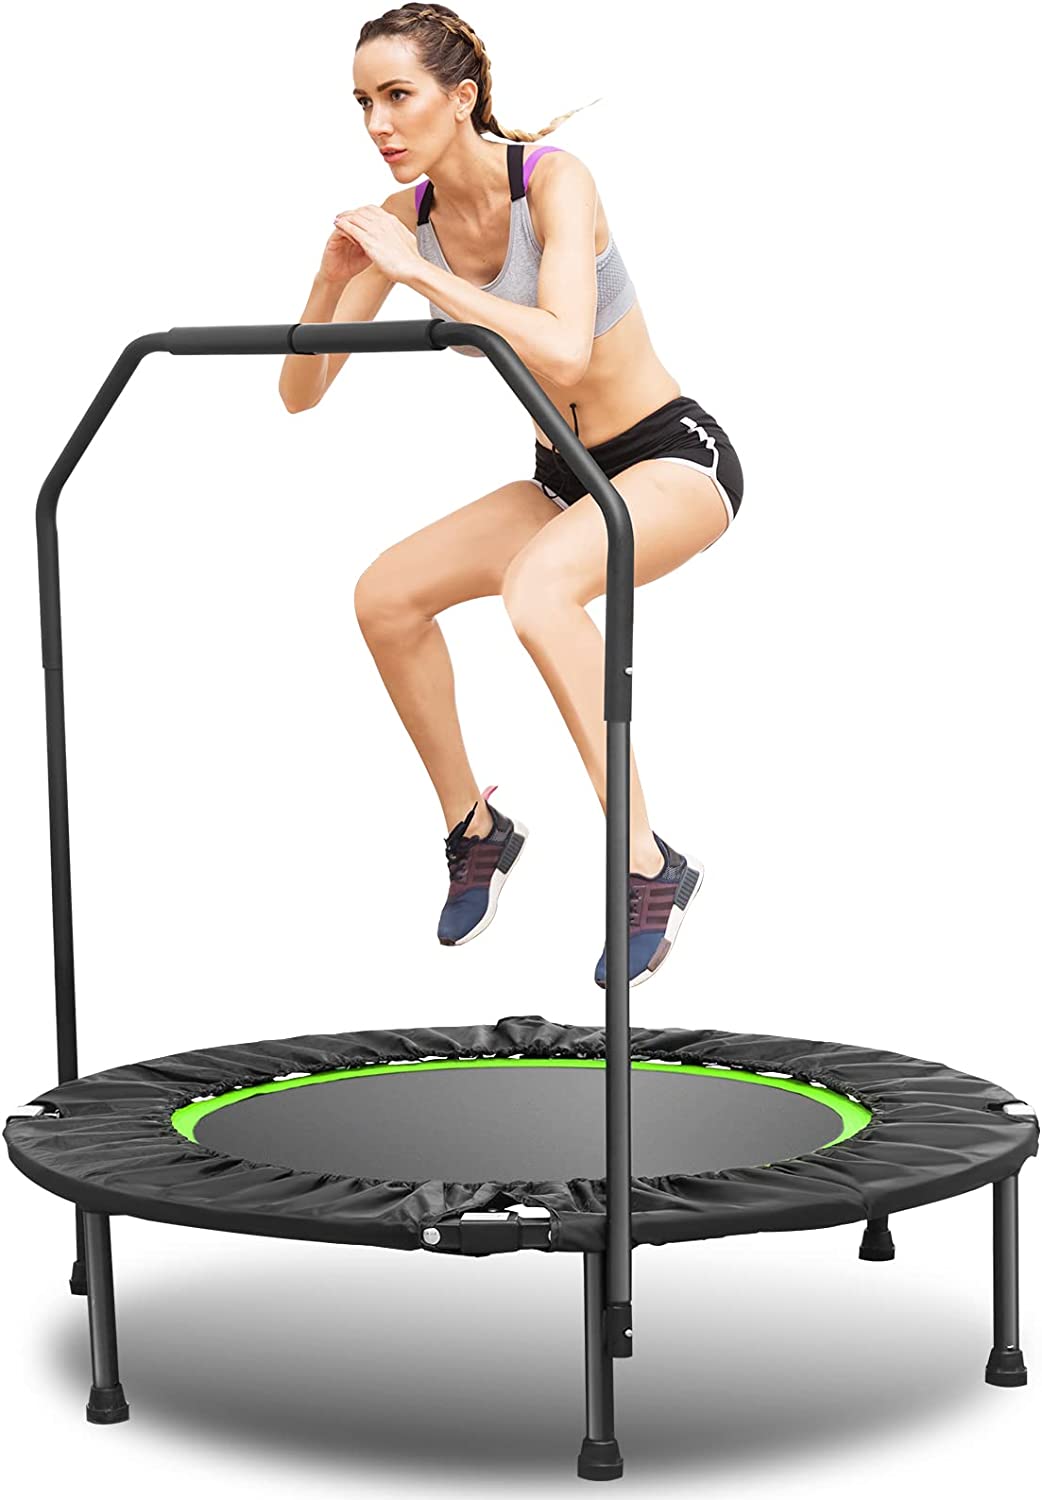 Stoel bundel melodie TheOne 40\" Exercise Trampoline,Mini Foldable Trampoline,Adjustable Fitness  Trampoline with Handle for Adult Kids,Indoor/